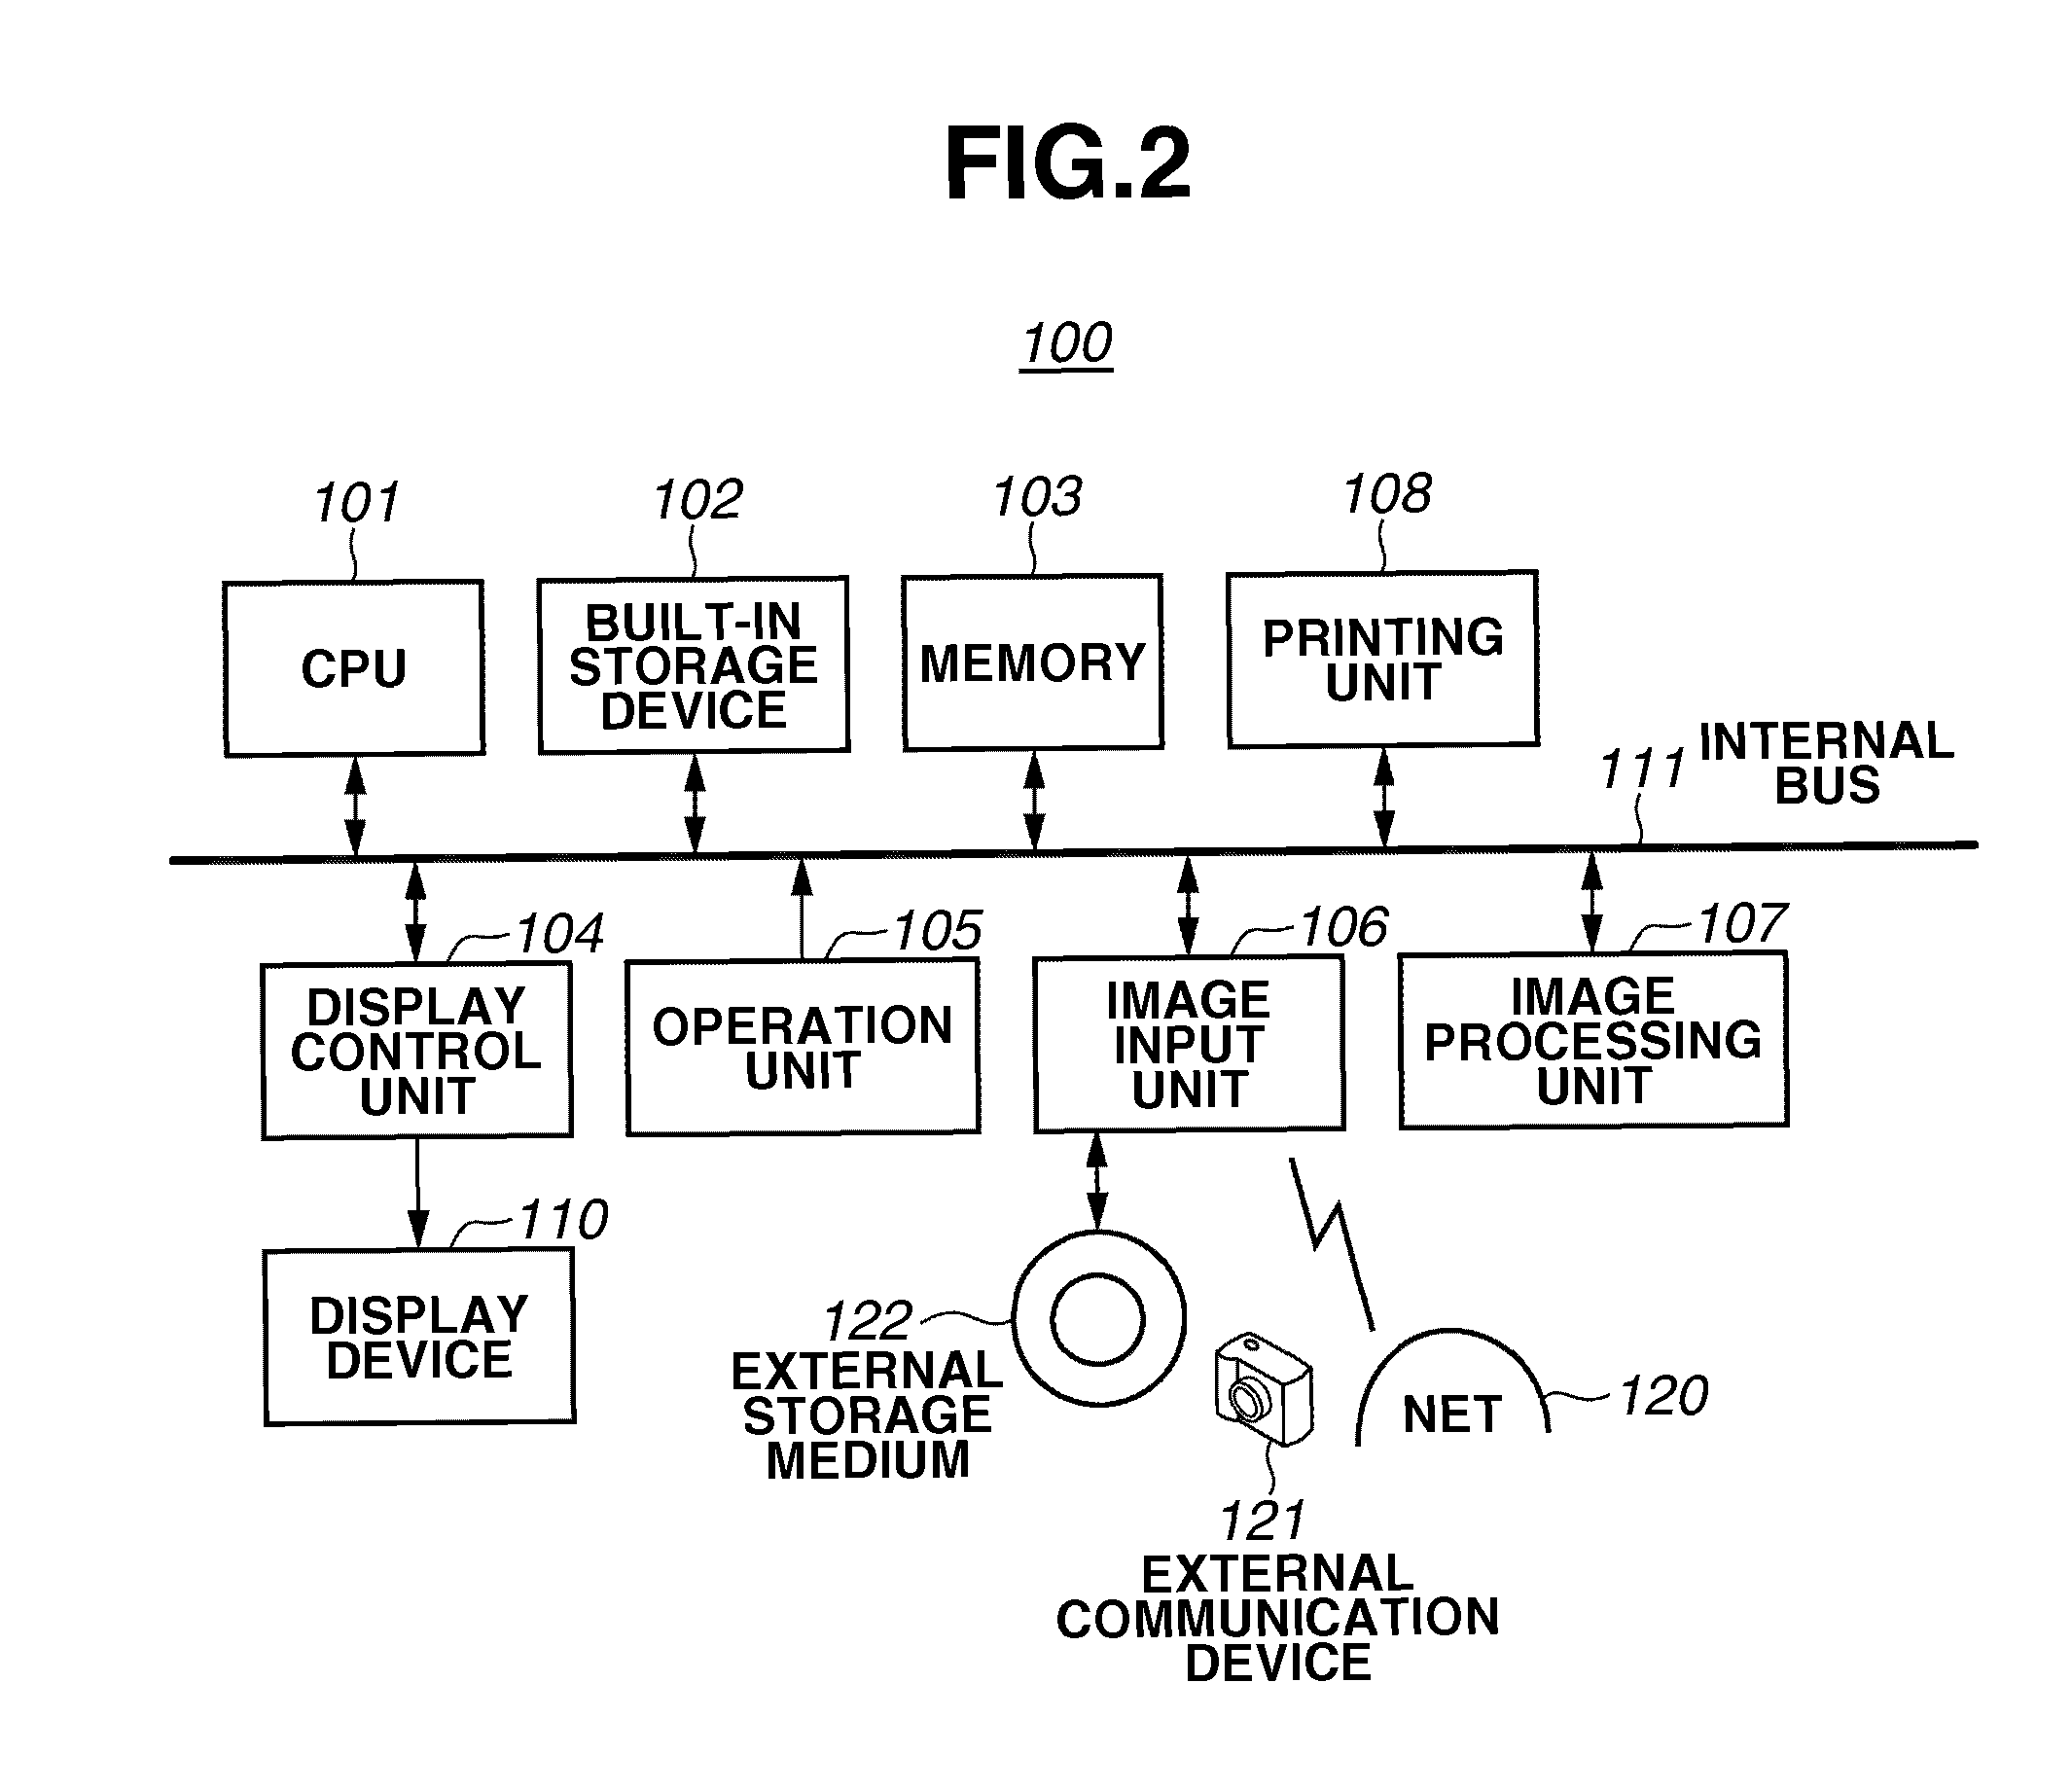 Image processing apparatus and method for controlling the image processing apparatus